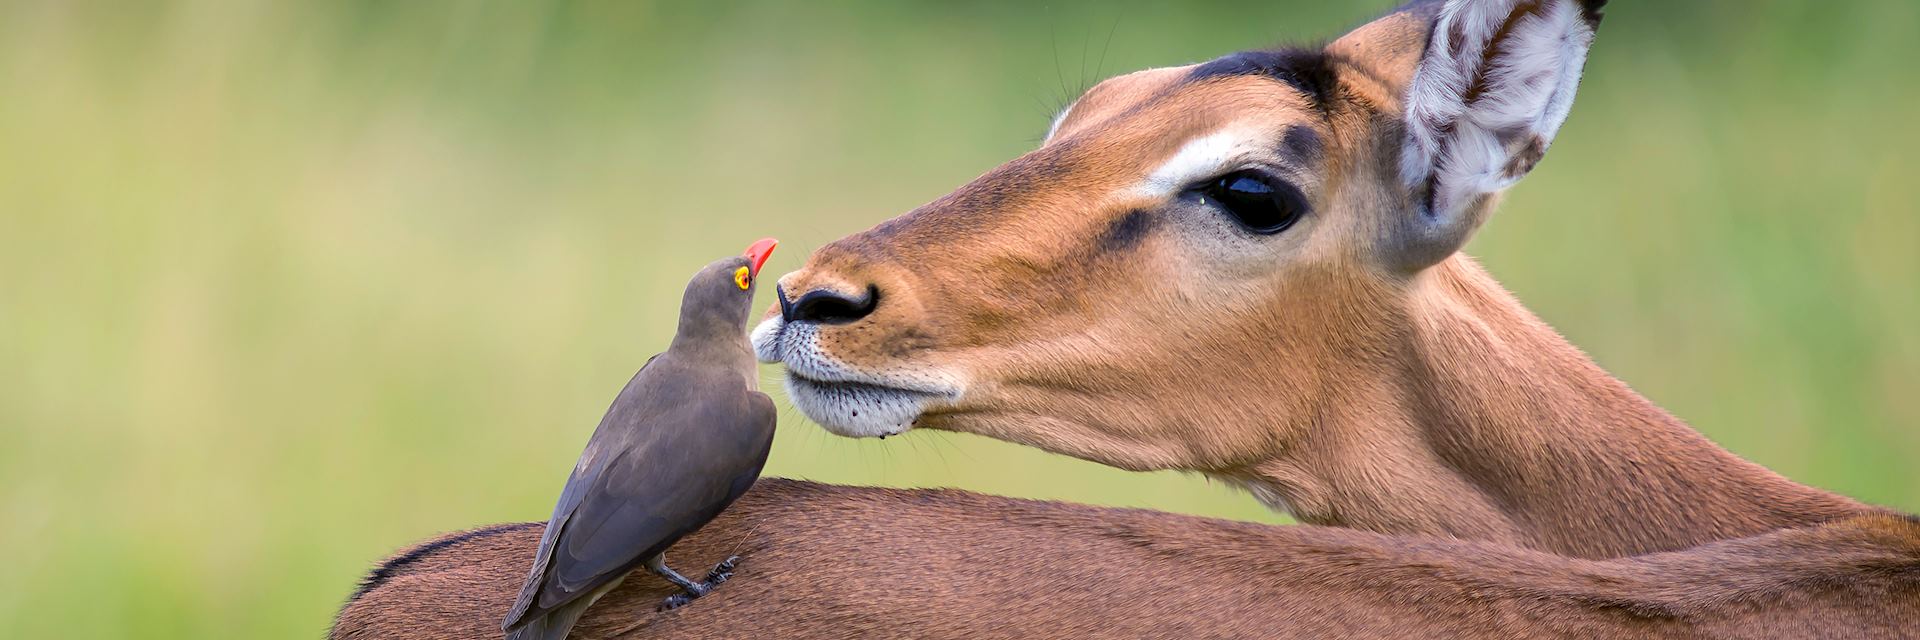 Impala with a red-billed oxpecker, Kruger National Park